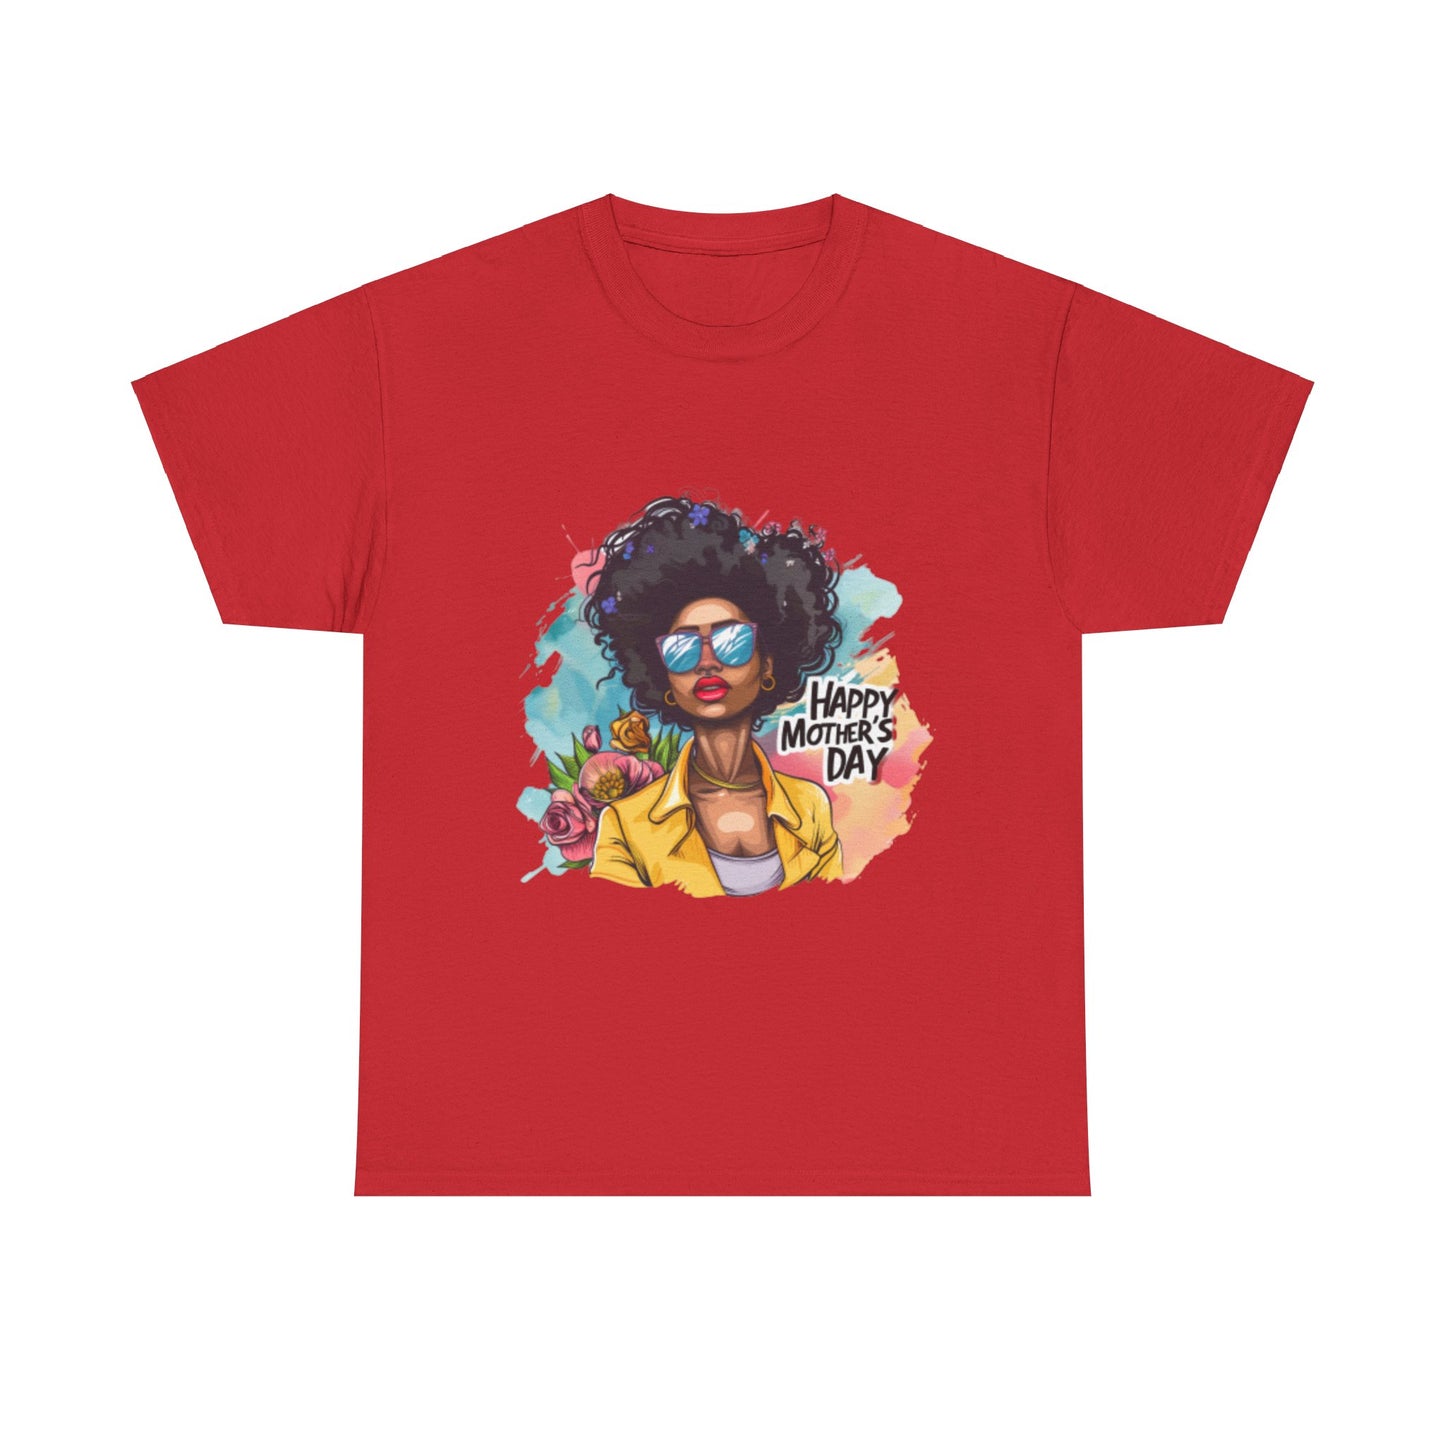 Happy Mother's Day African American Mom Graphic Unisex Heavy Cotton Tee Cotton Funny Humorous Graphic Soft Premium Unisex Men Women Red T-shirt Birthday Gift-7